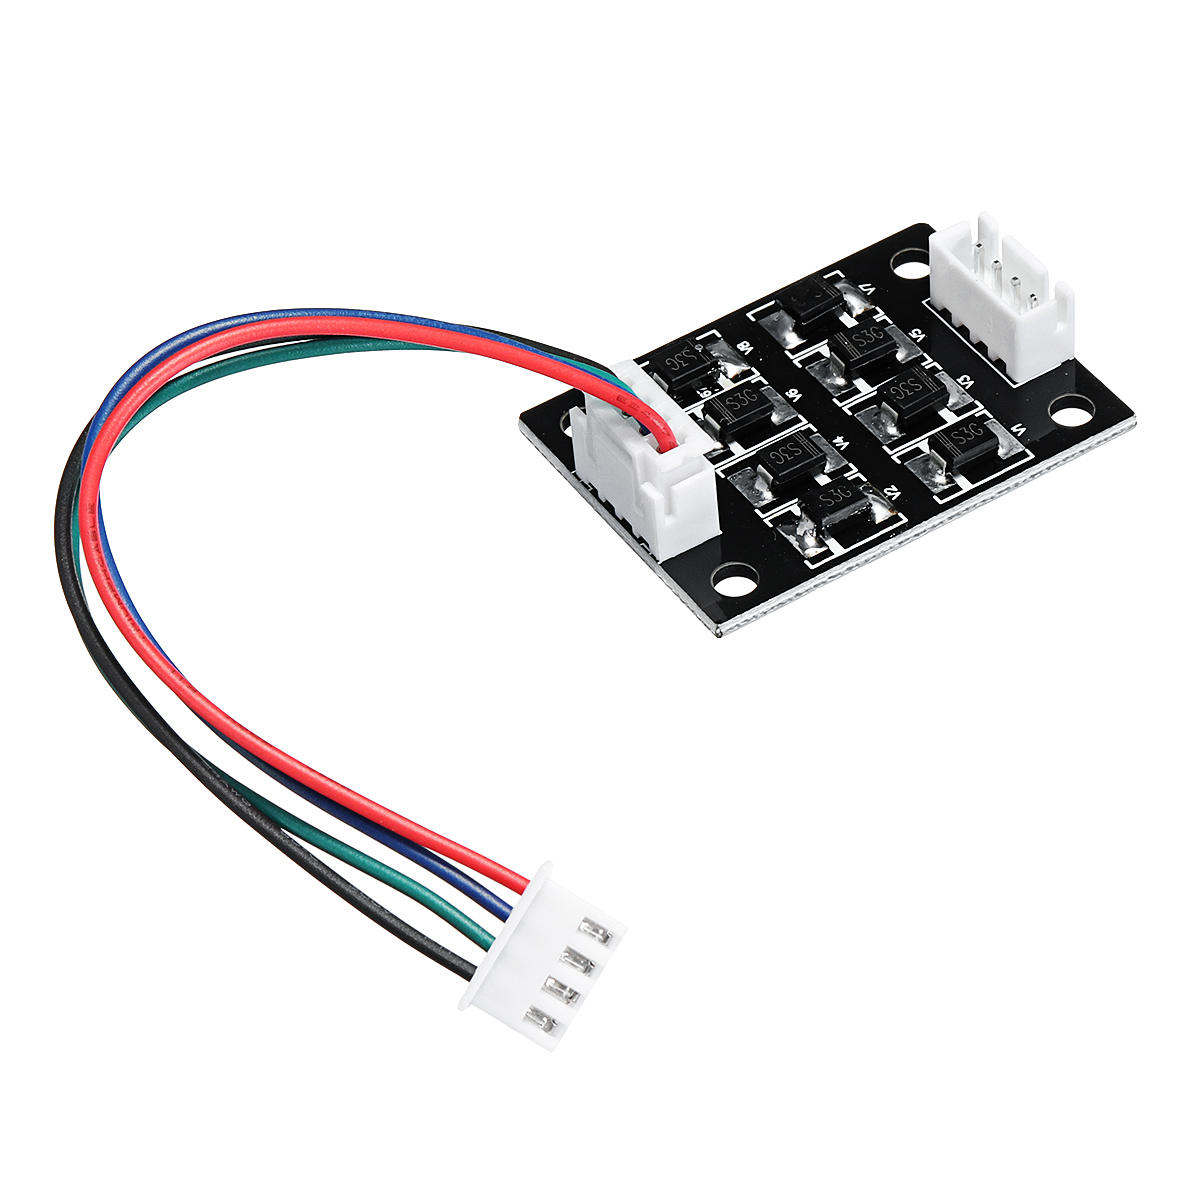 

10PCS TL-Smoother Addon Module With Dupont Line For 3D Printer Stepper Motor